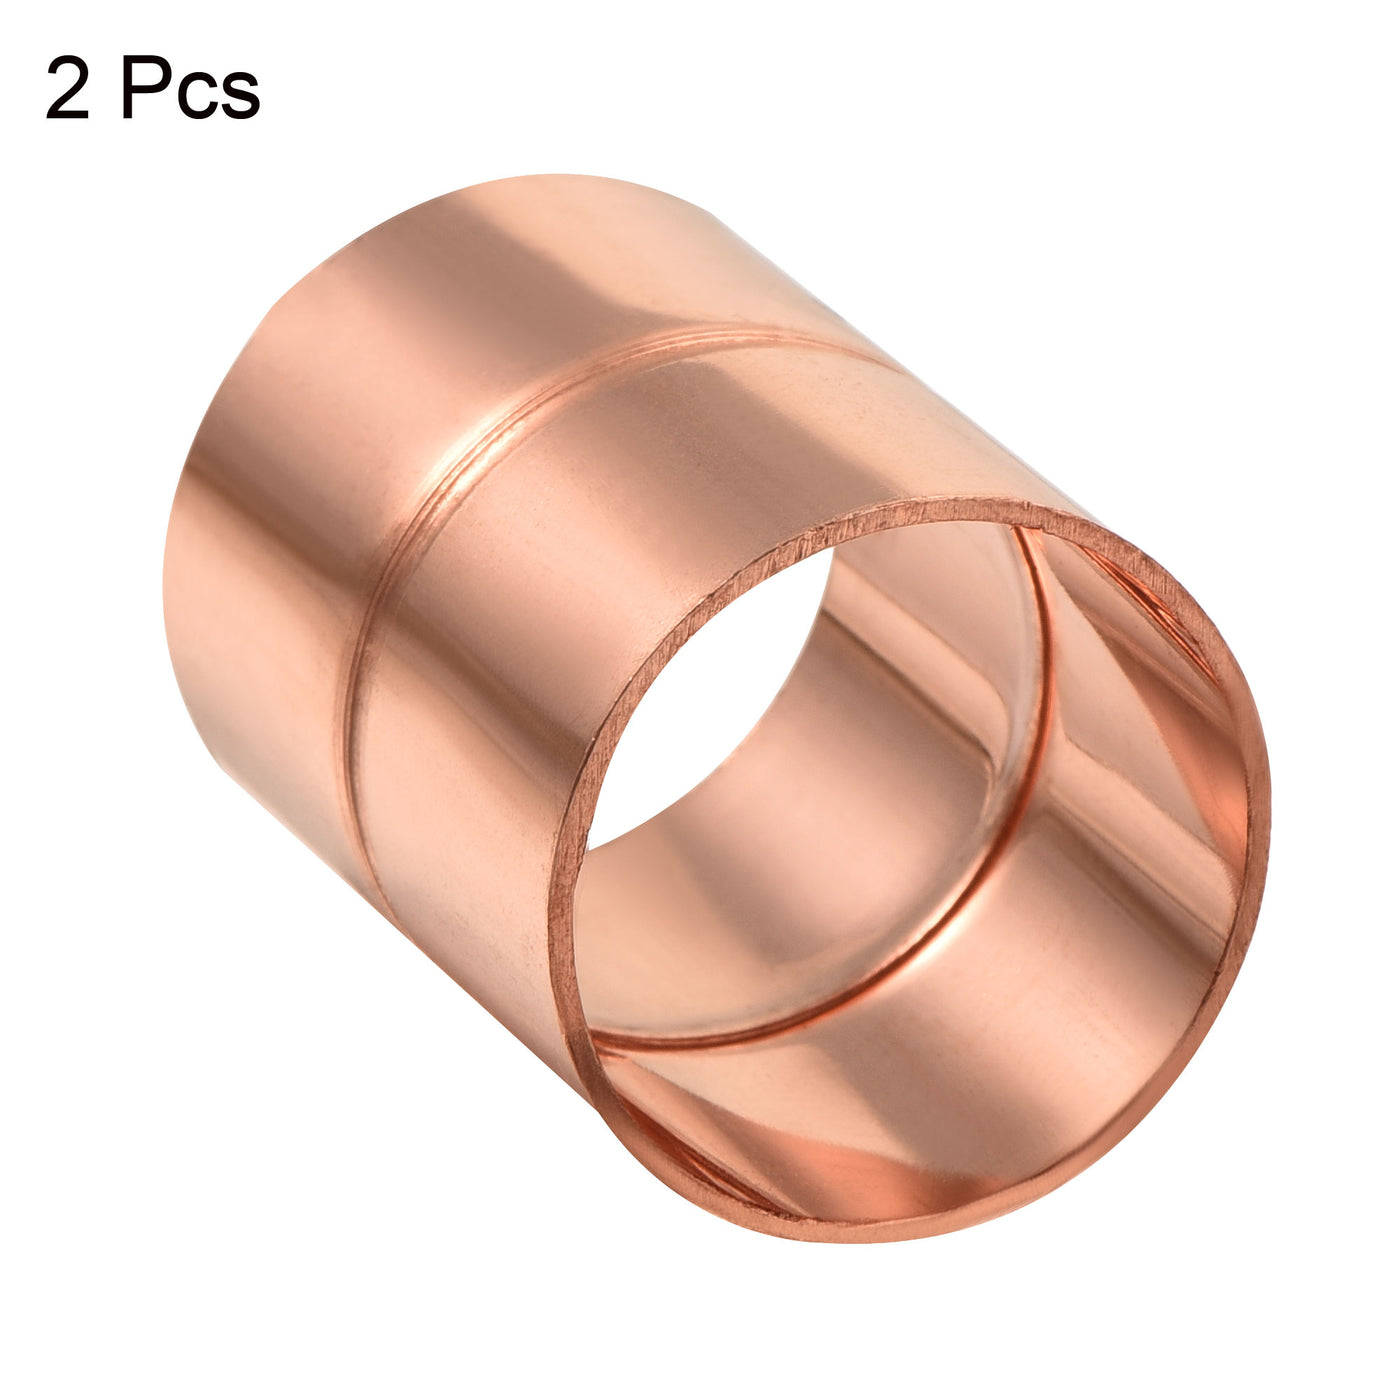 Harfington Straight Copper Coupling Fittings, 0.87 Inch ID Welding Joint for HVAC Air Conditioner, Pack of 2